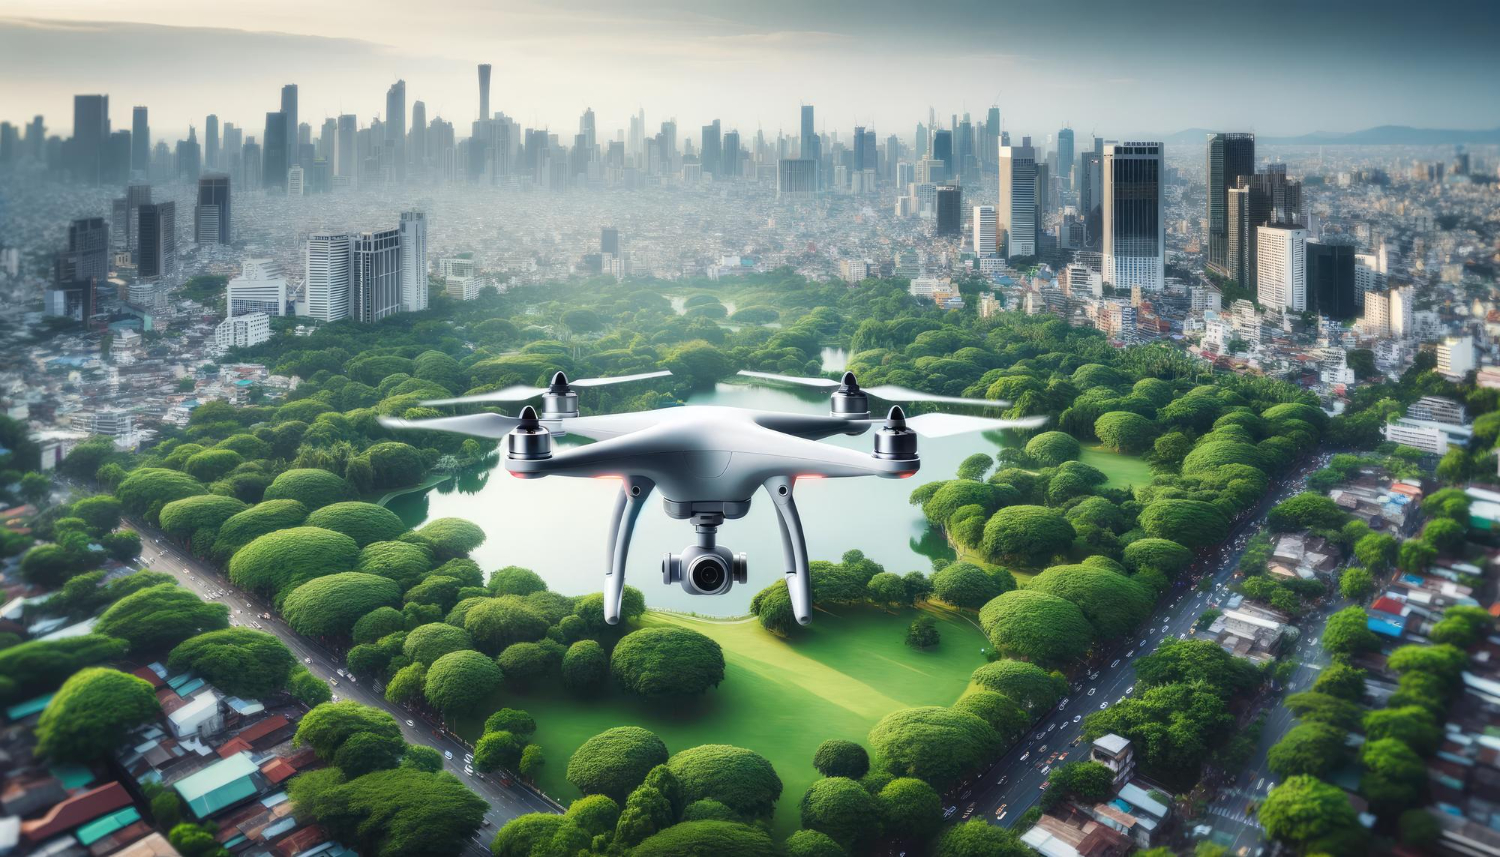 Future Trends and Developments in Construction Drones